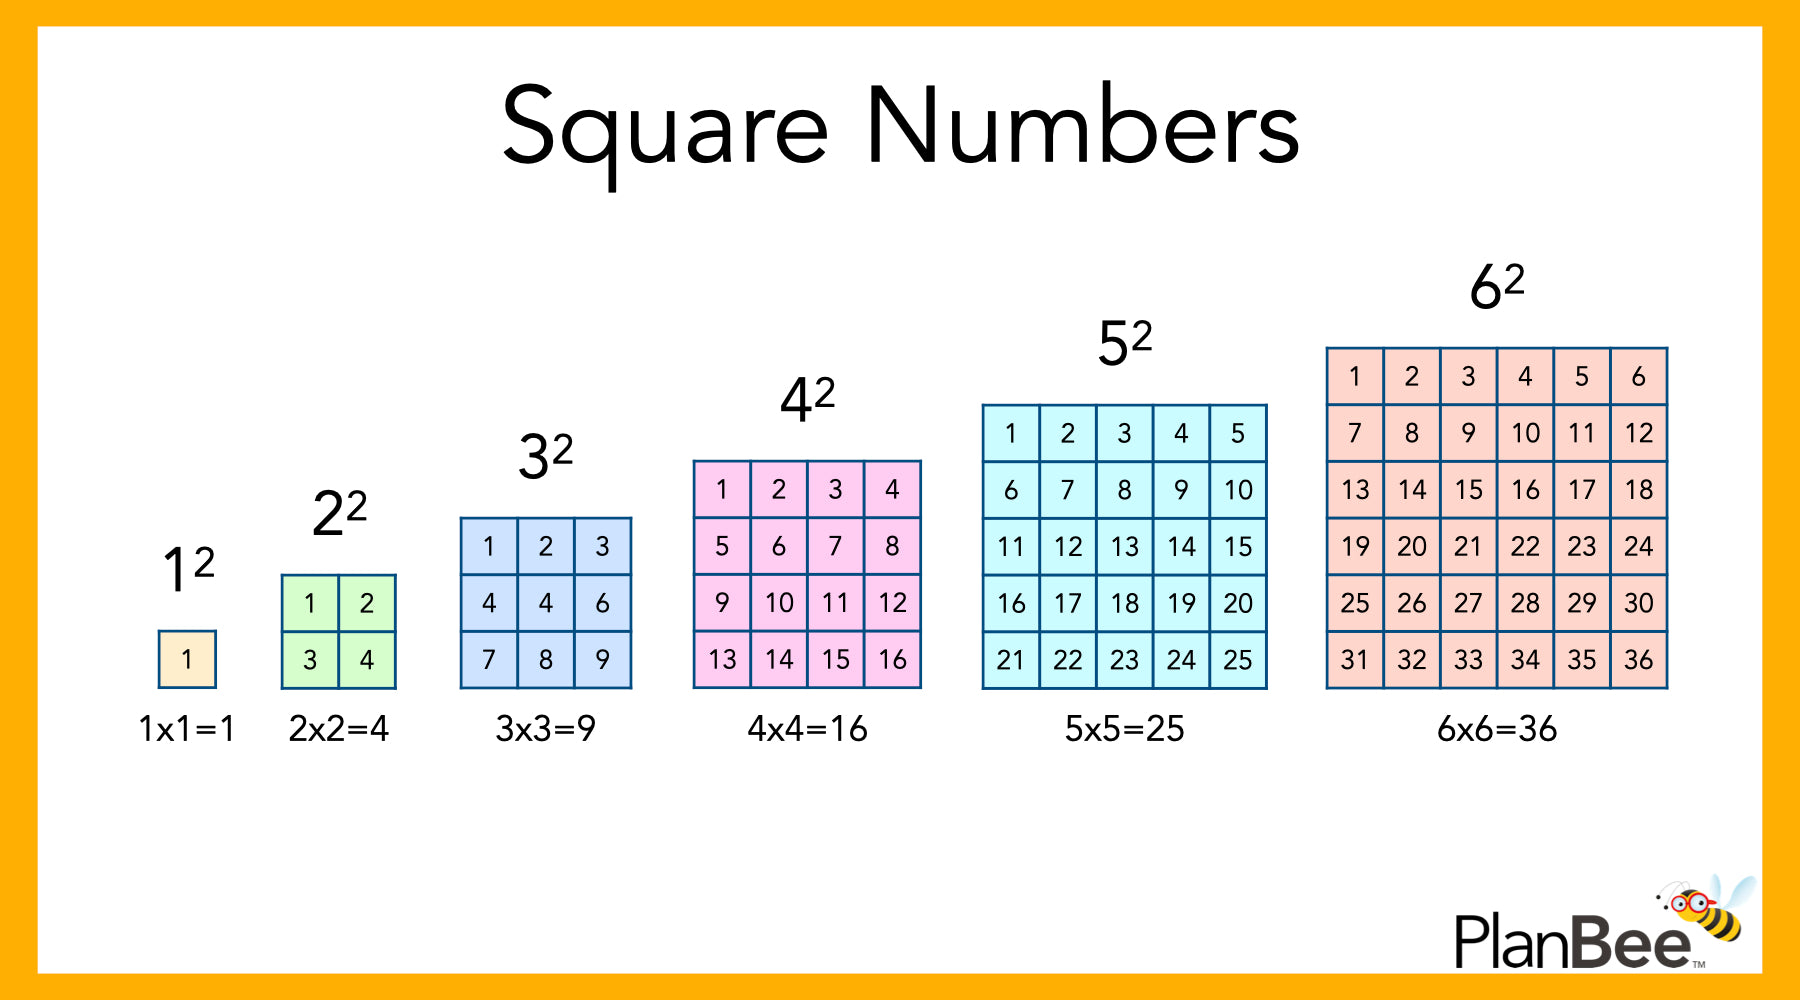 Square numbers diagram 1x1 to 6x6